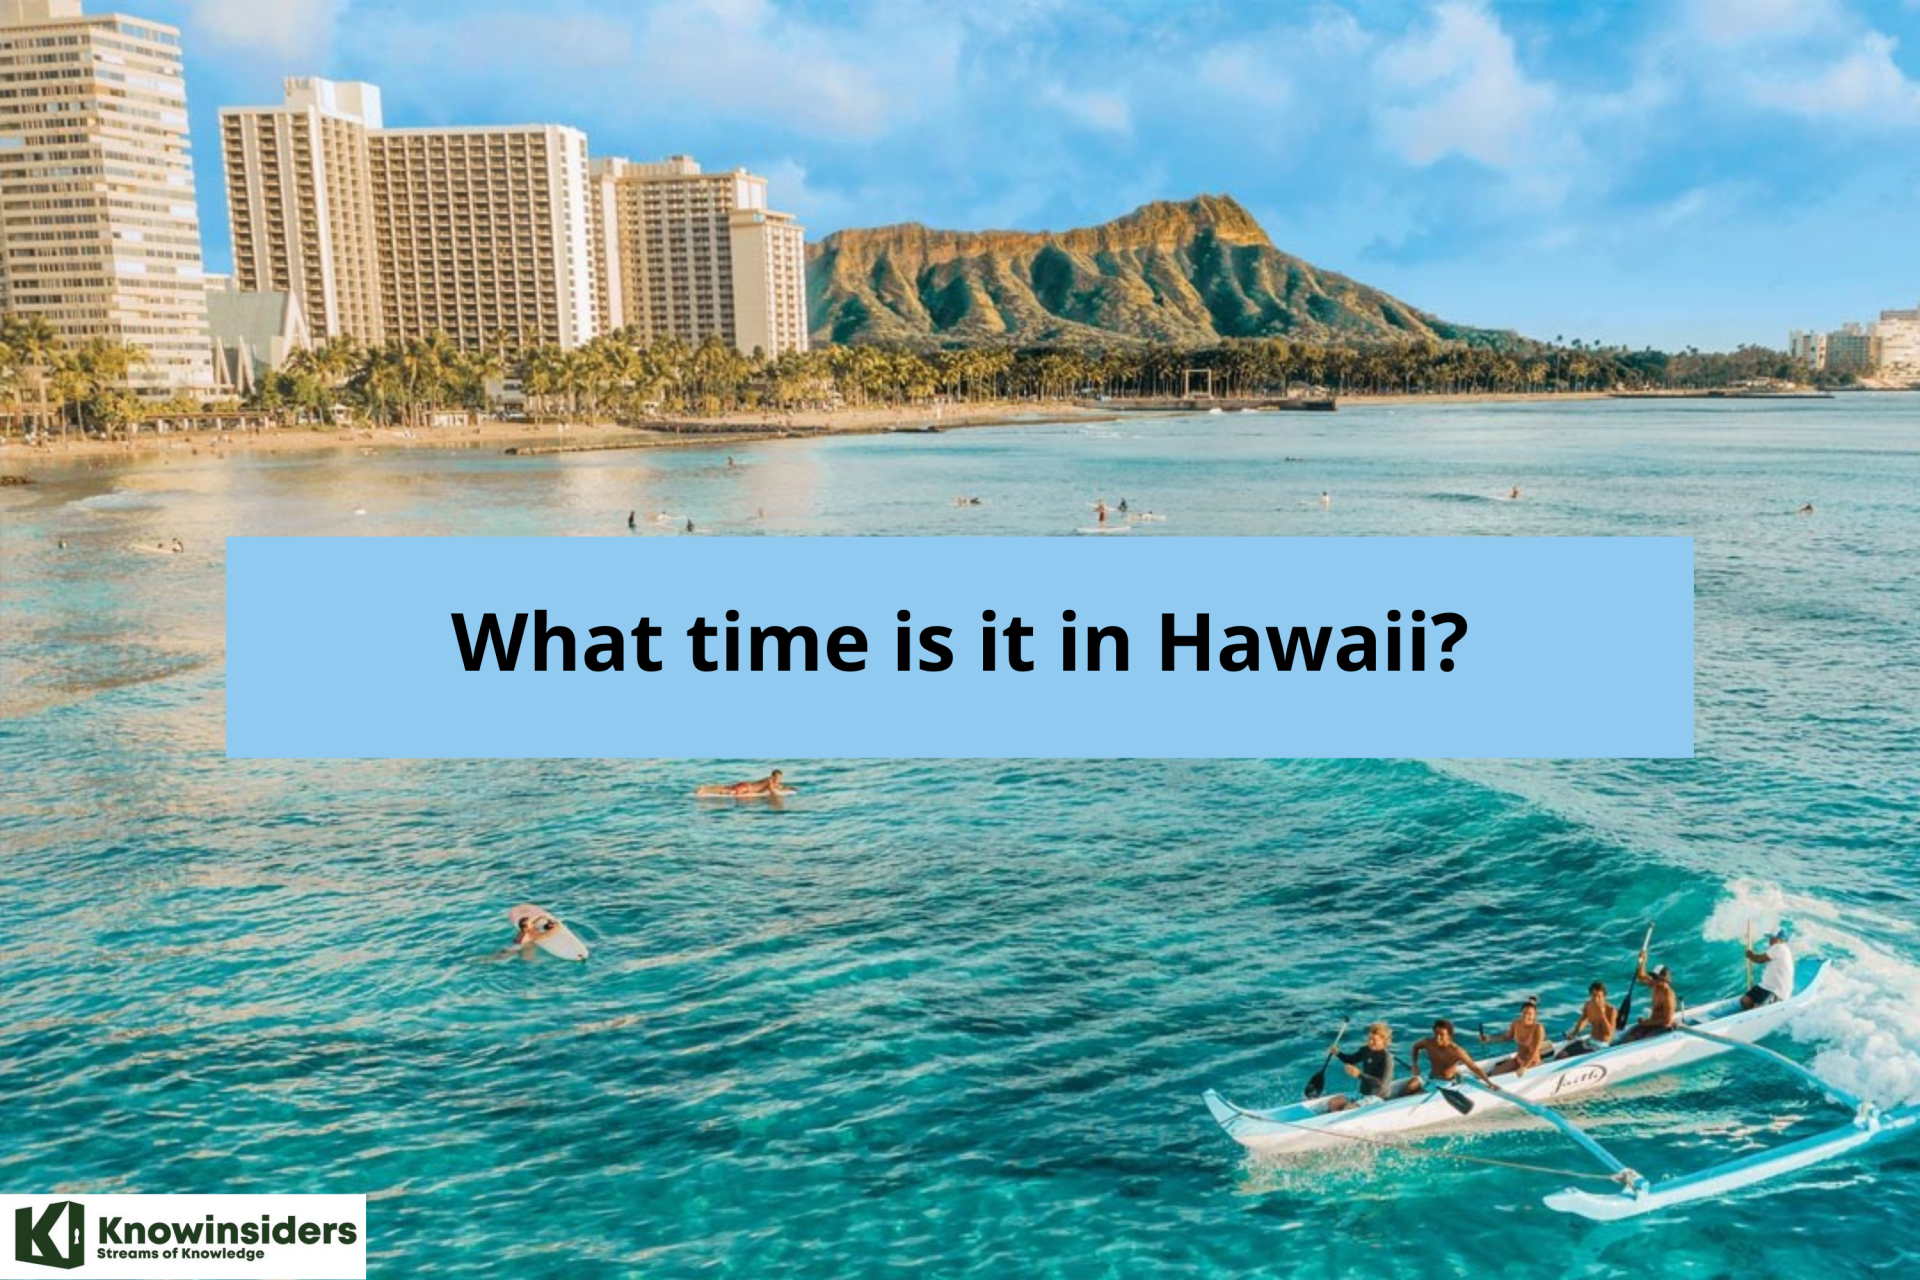 What time is it in Hawaii